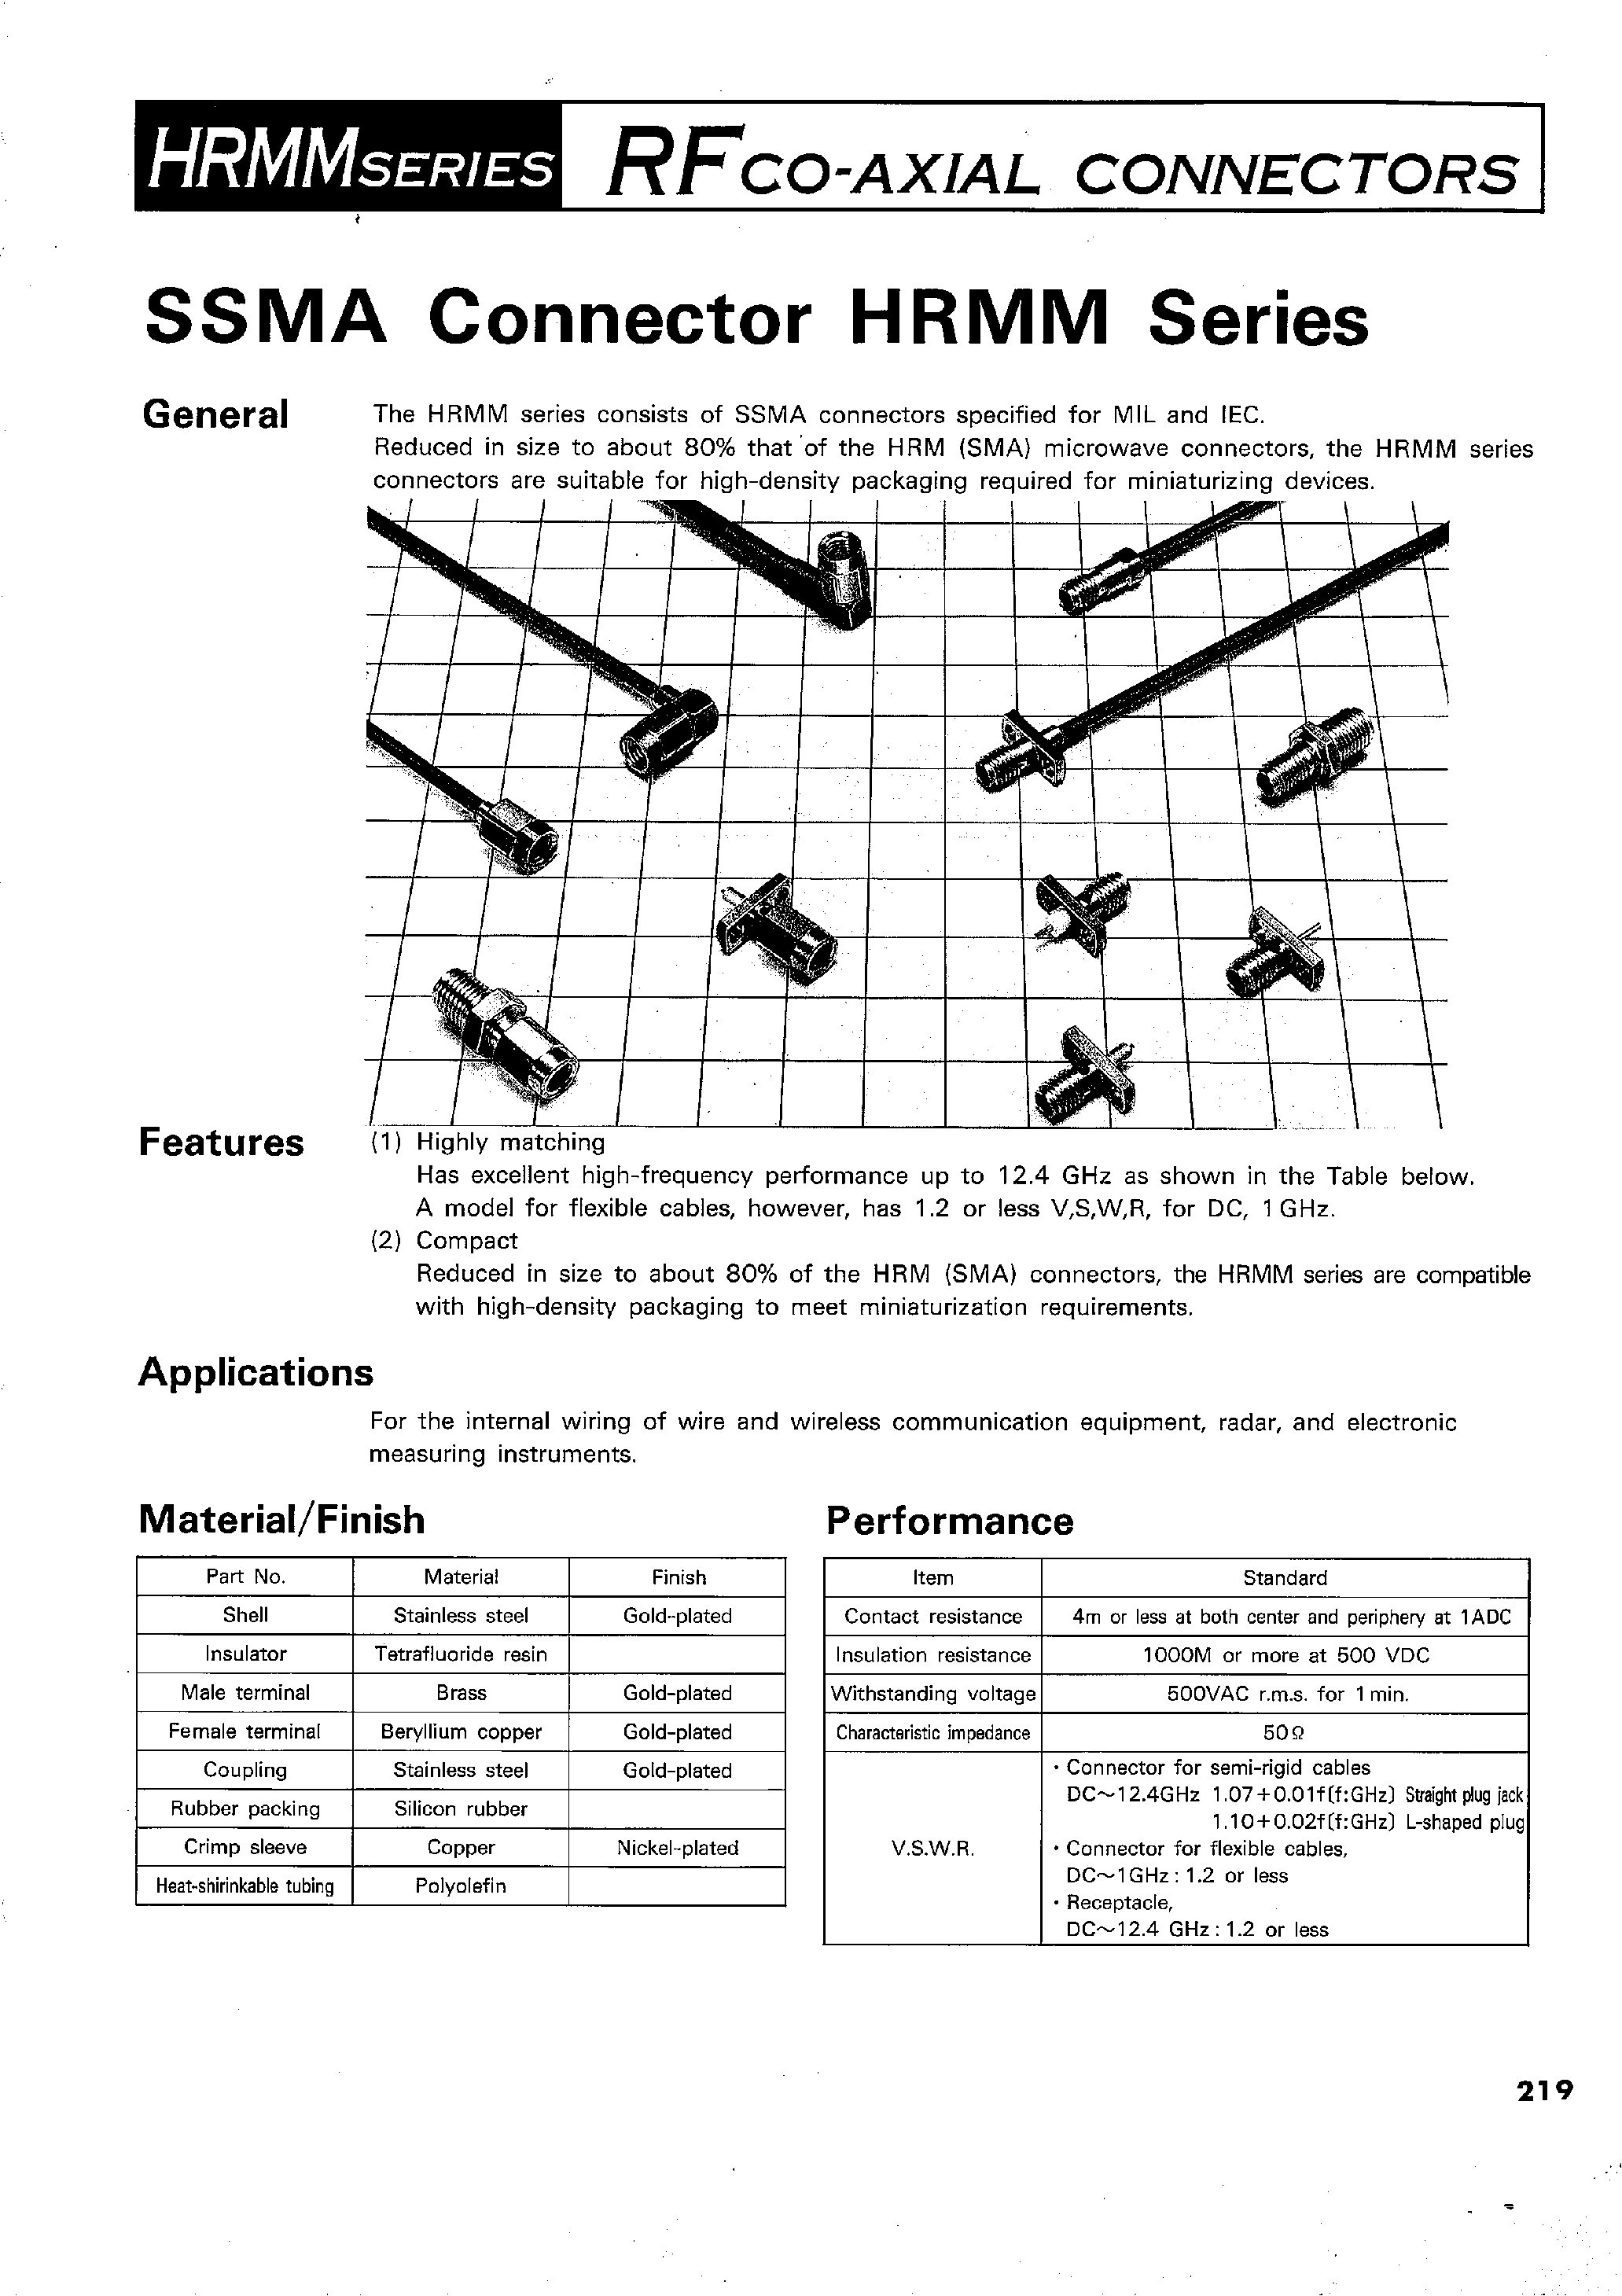 Datasheet HRMM-T-1 - RFCO-AXIAL CONNECTORS page 1